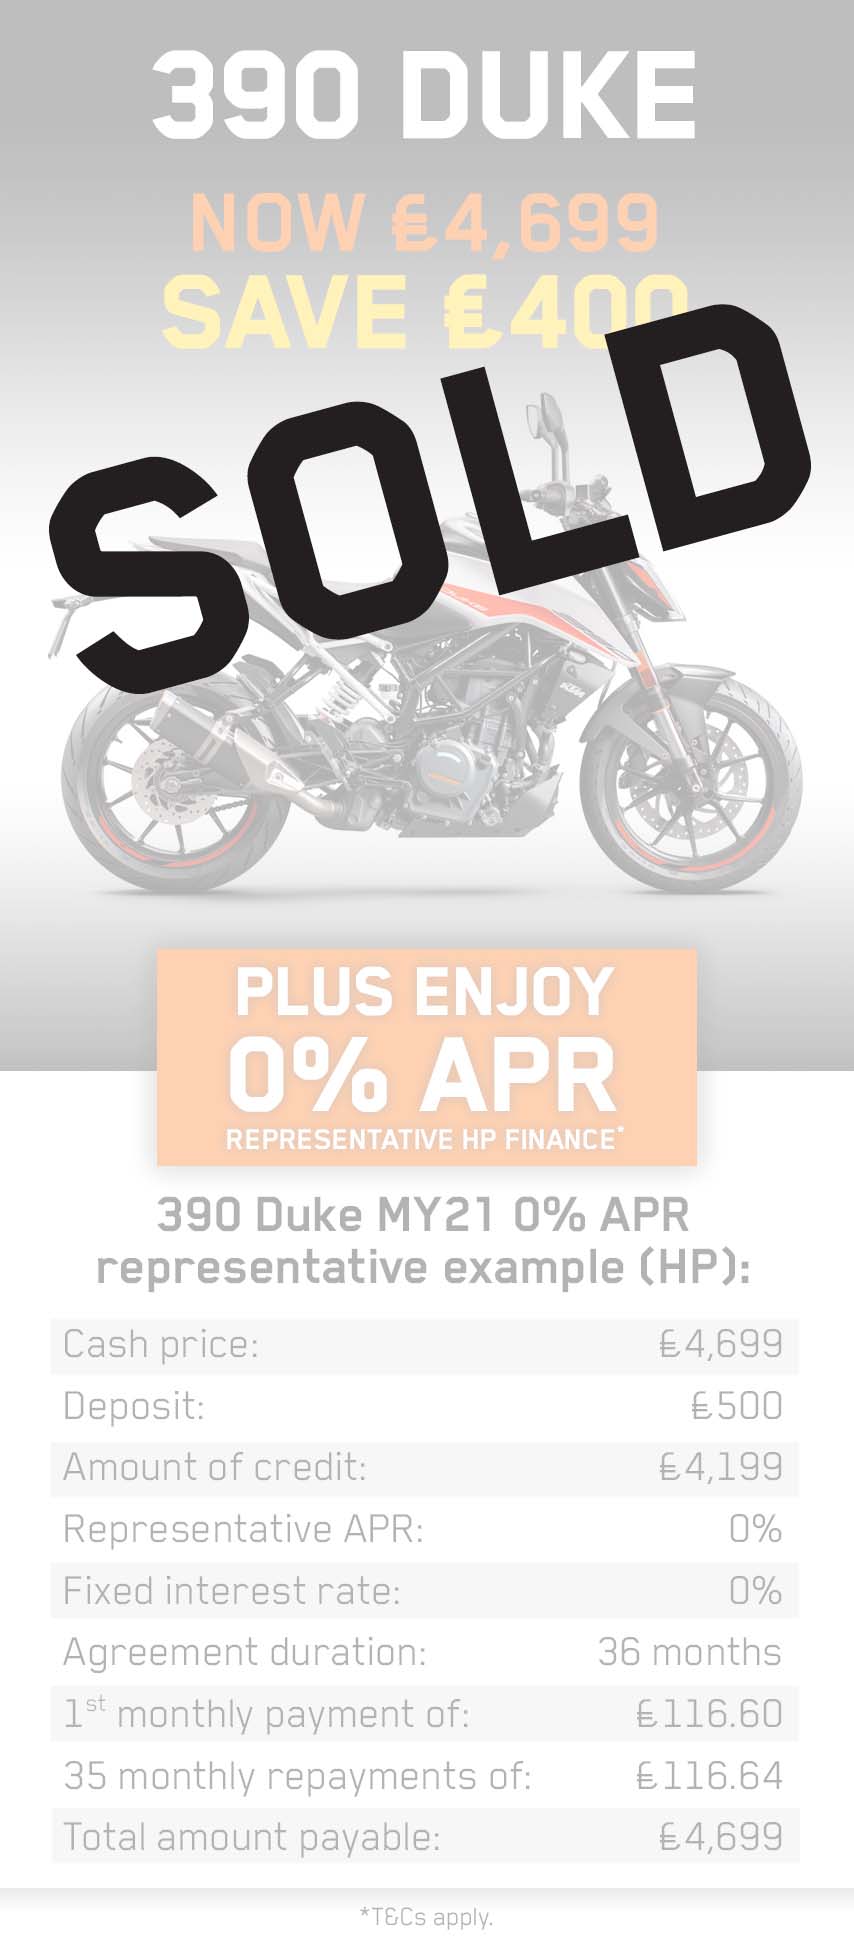 New Laguna exclusive offer available on the KTM 390 Duke